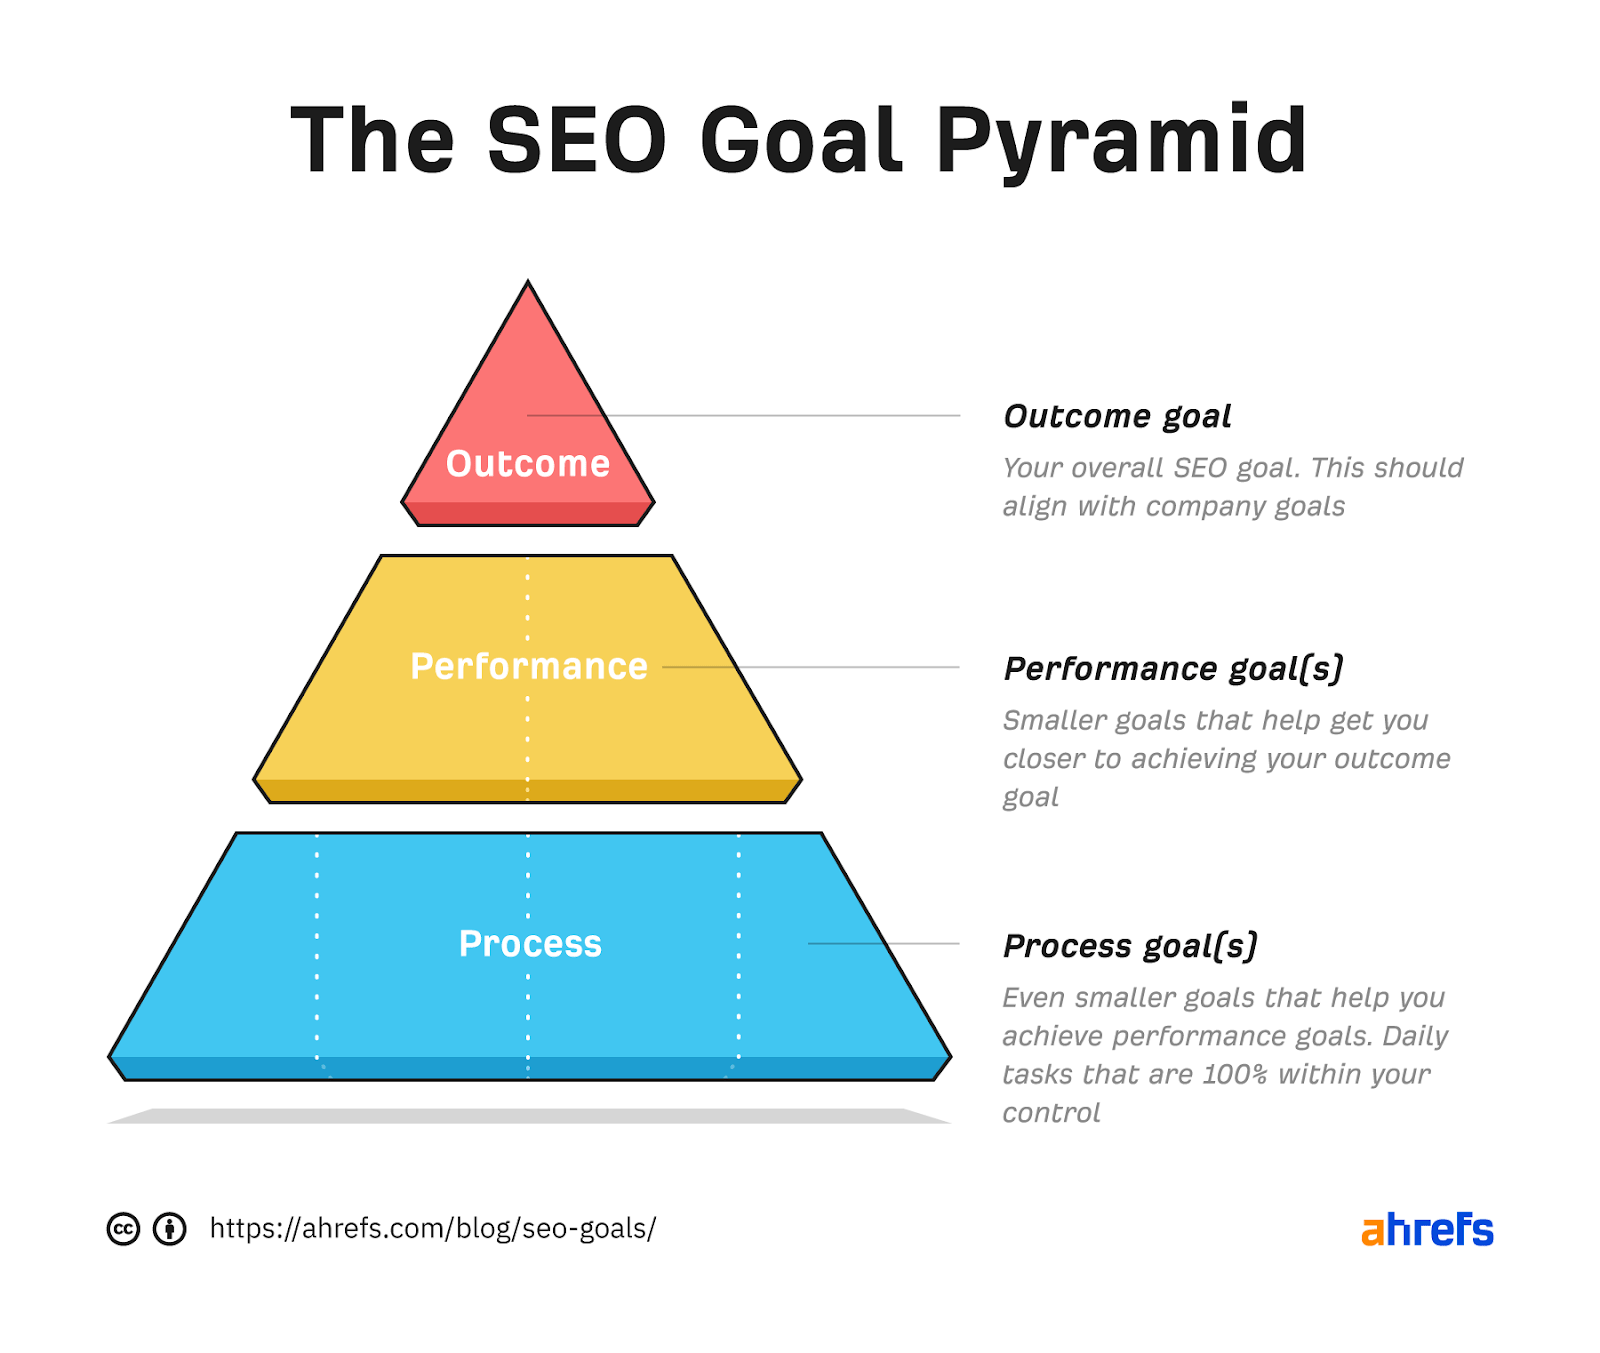 SEO goal pyramid divided into 3 sections (from top to bottom): outcome, performance, process